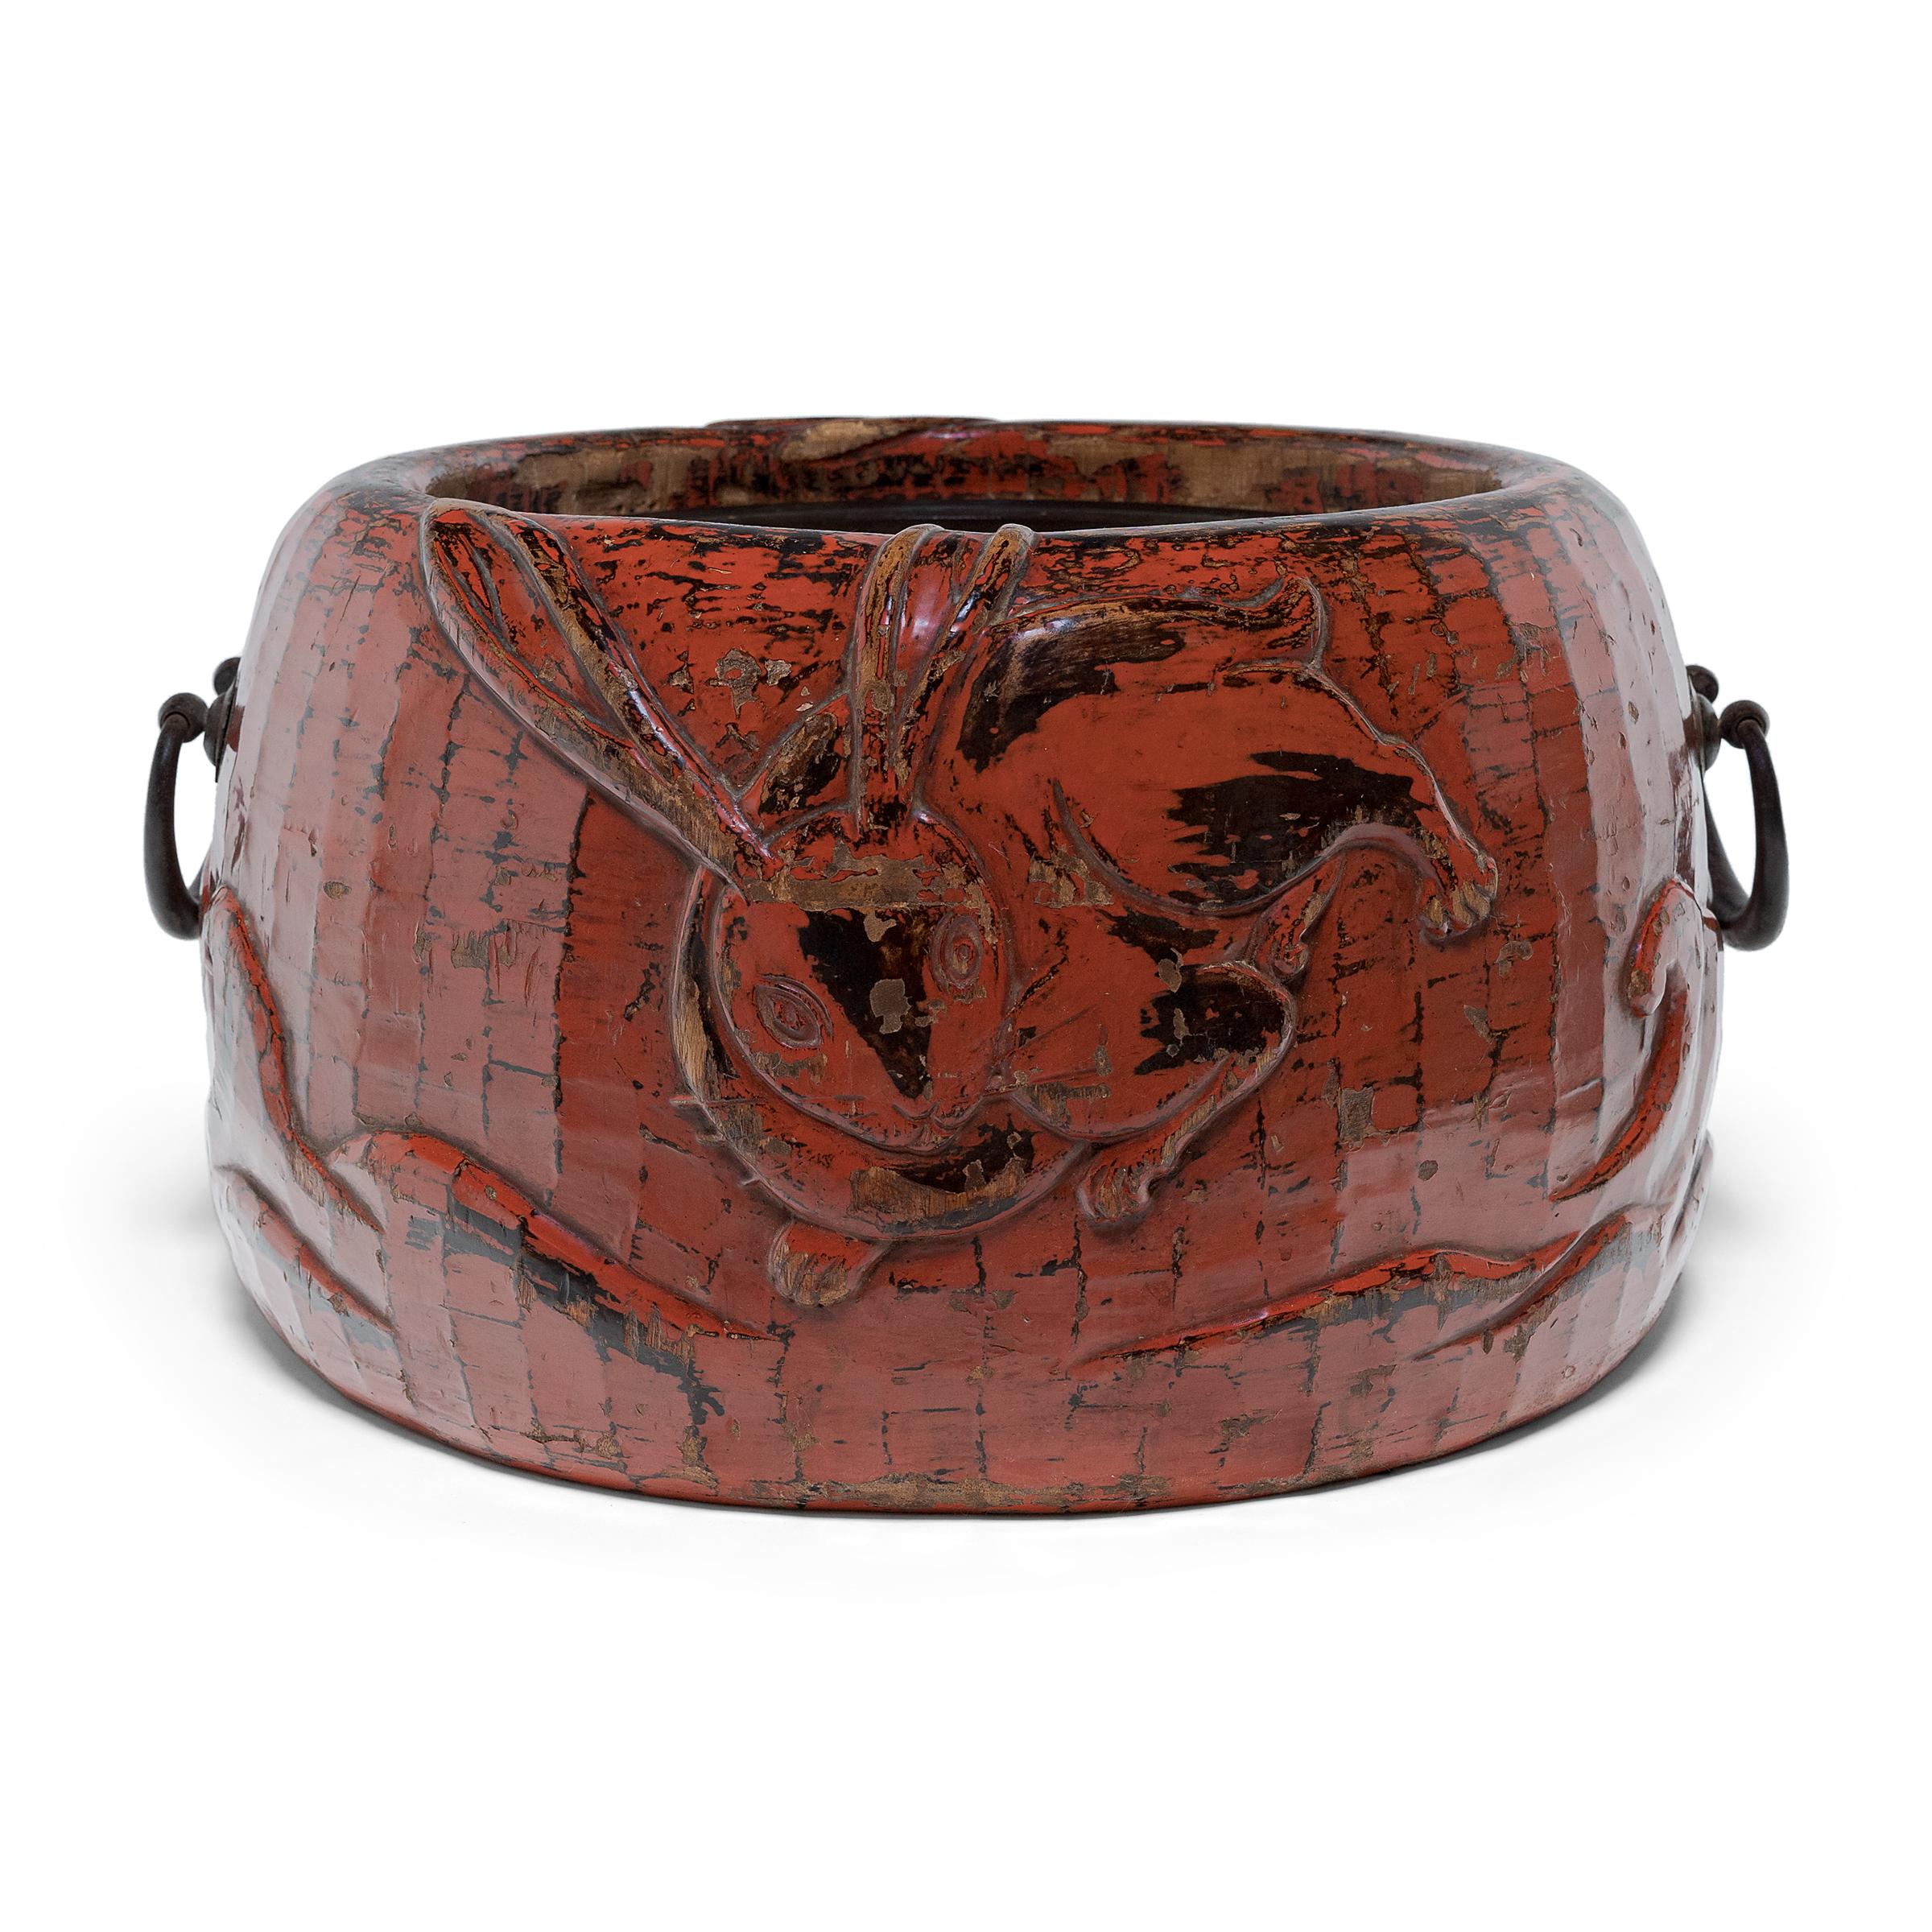 Hand-Carved Japanese Red Lacquer Negoro Hibachi with Rabbits, Edo Period, c. 1850 For Sale